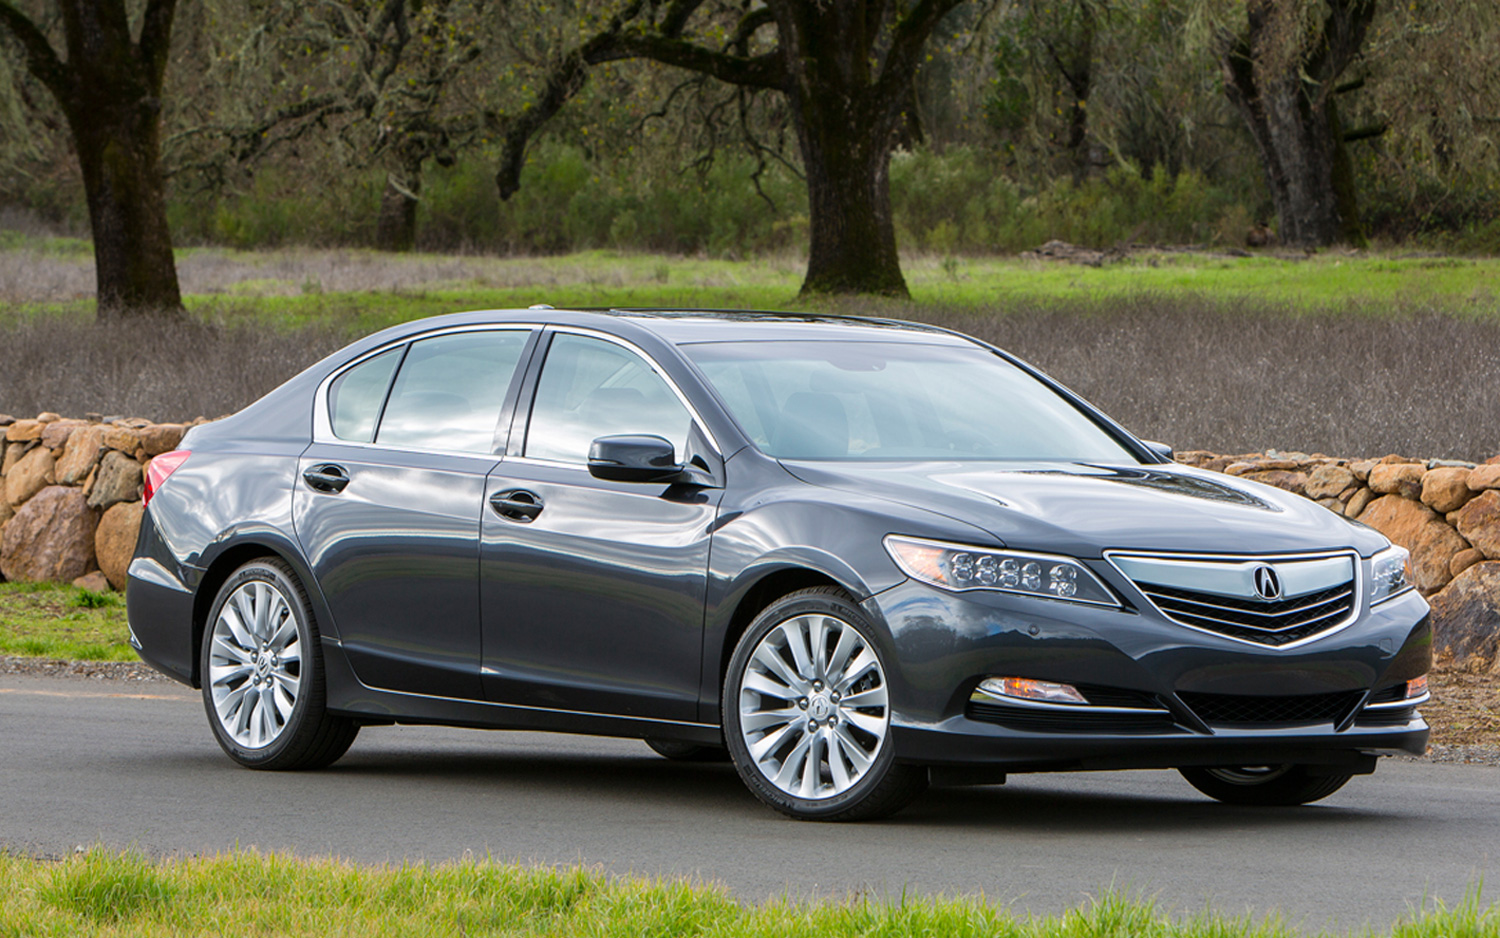 2014 Acura RLX Luxury Sedan Photos Pictures HD Wallpapers Collection